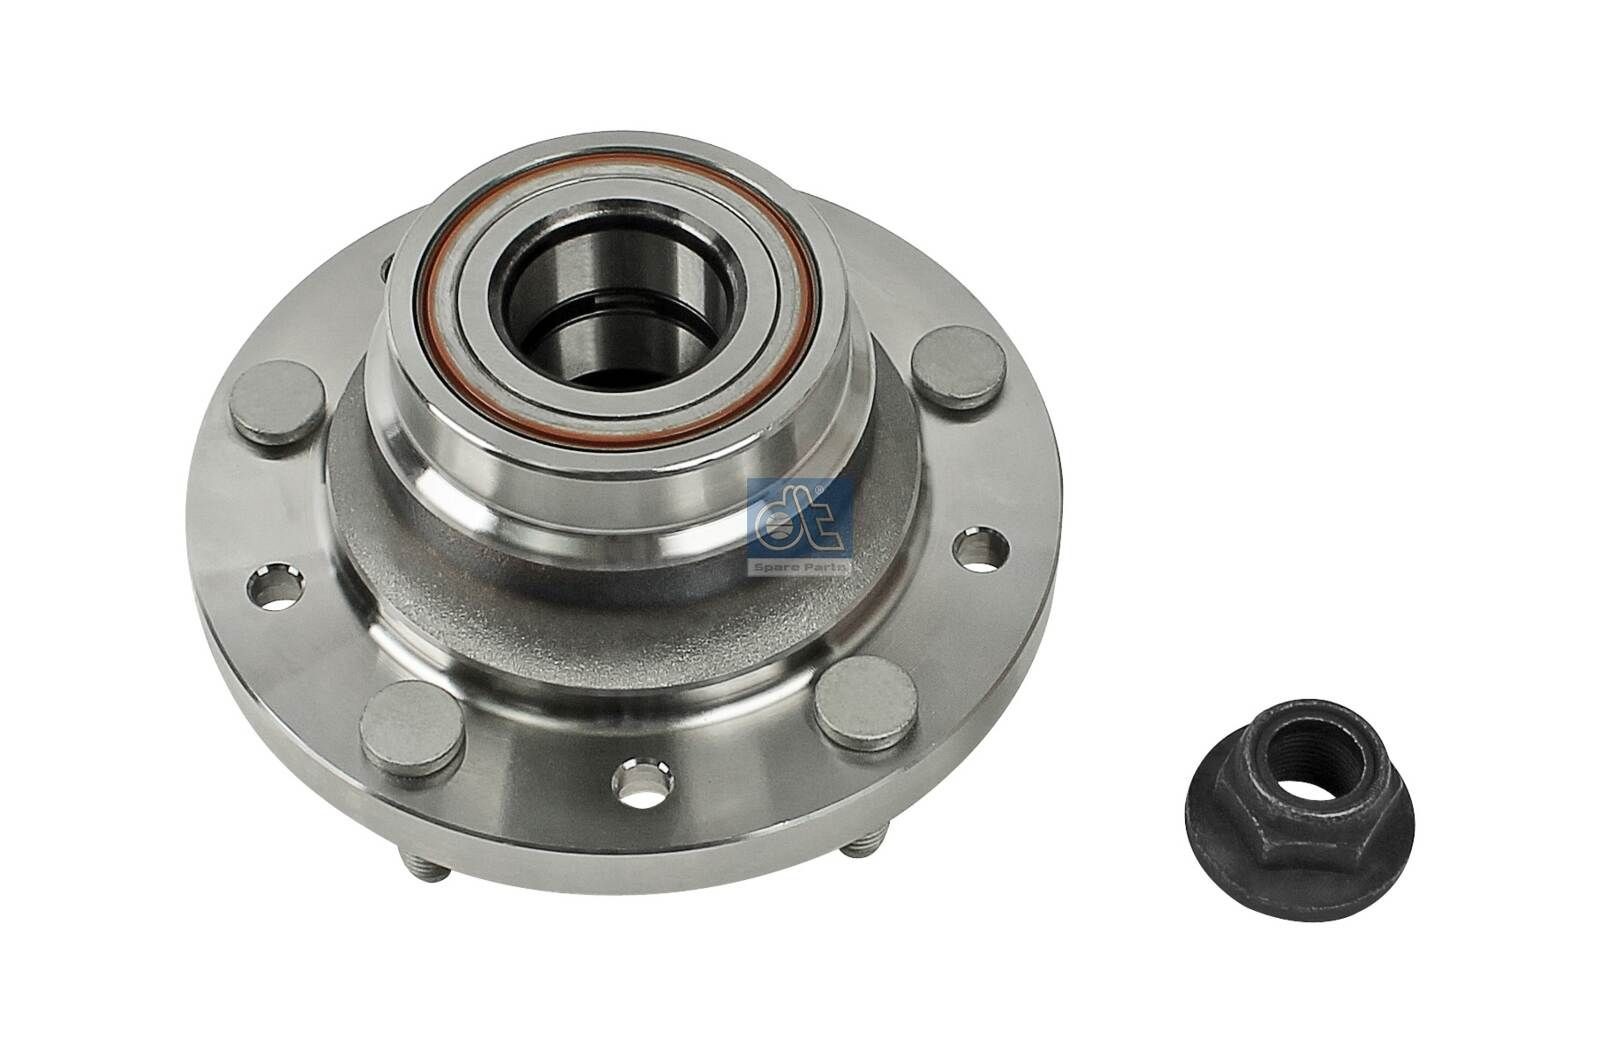 DT Spare Parts 13.92104 Wheel bearing kit Rear Axle, 193 mm